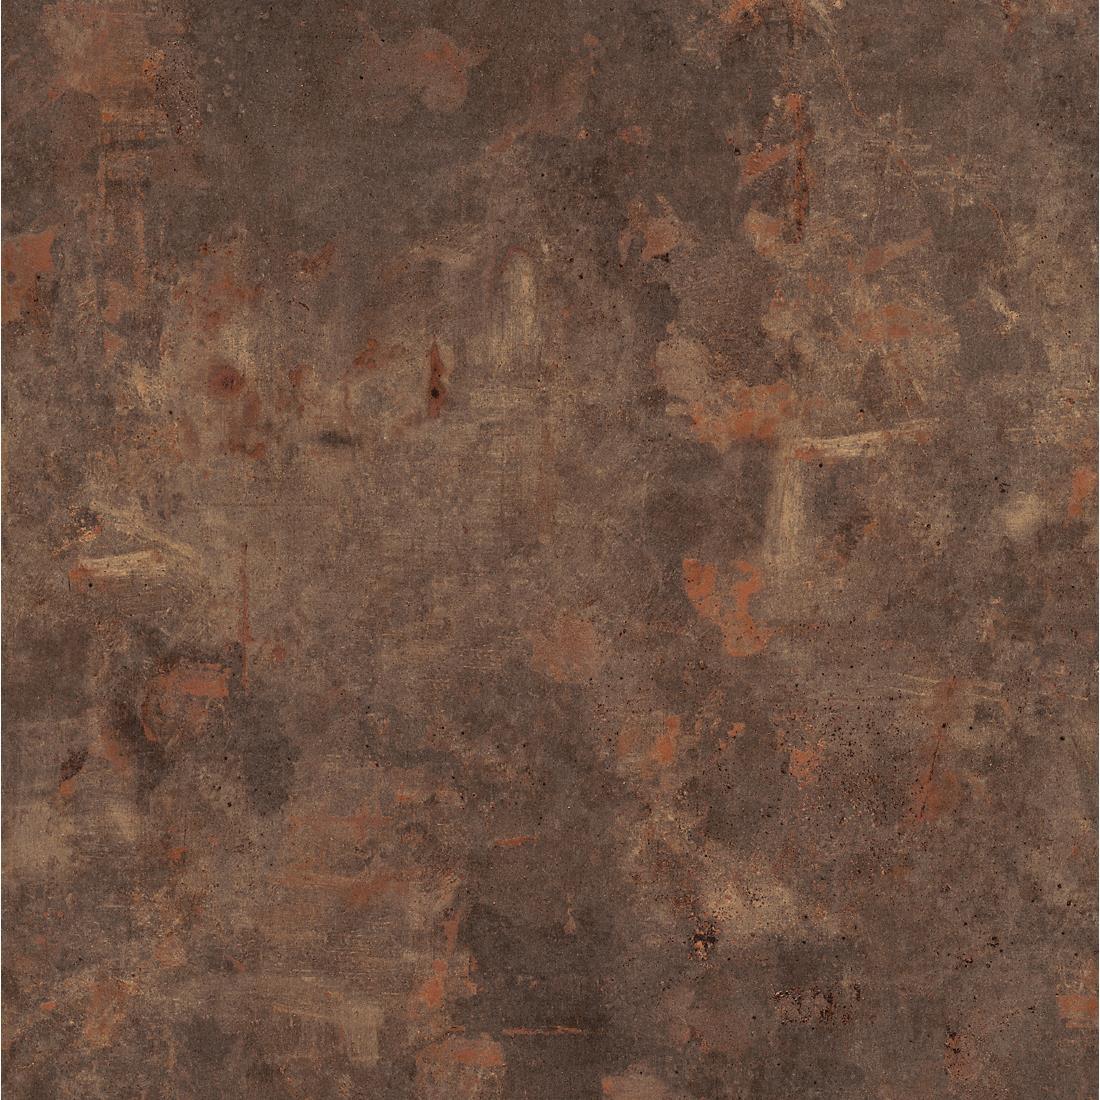 Werzalit Pre-drilled Square Table Top  Rust Brown 800mm - GR643  - 1